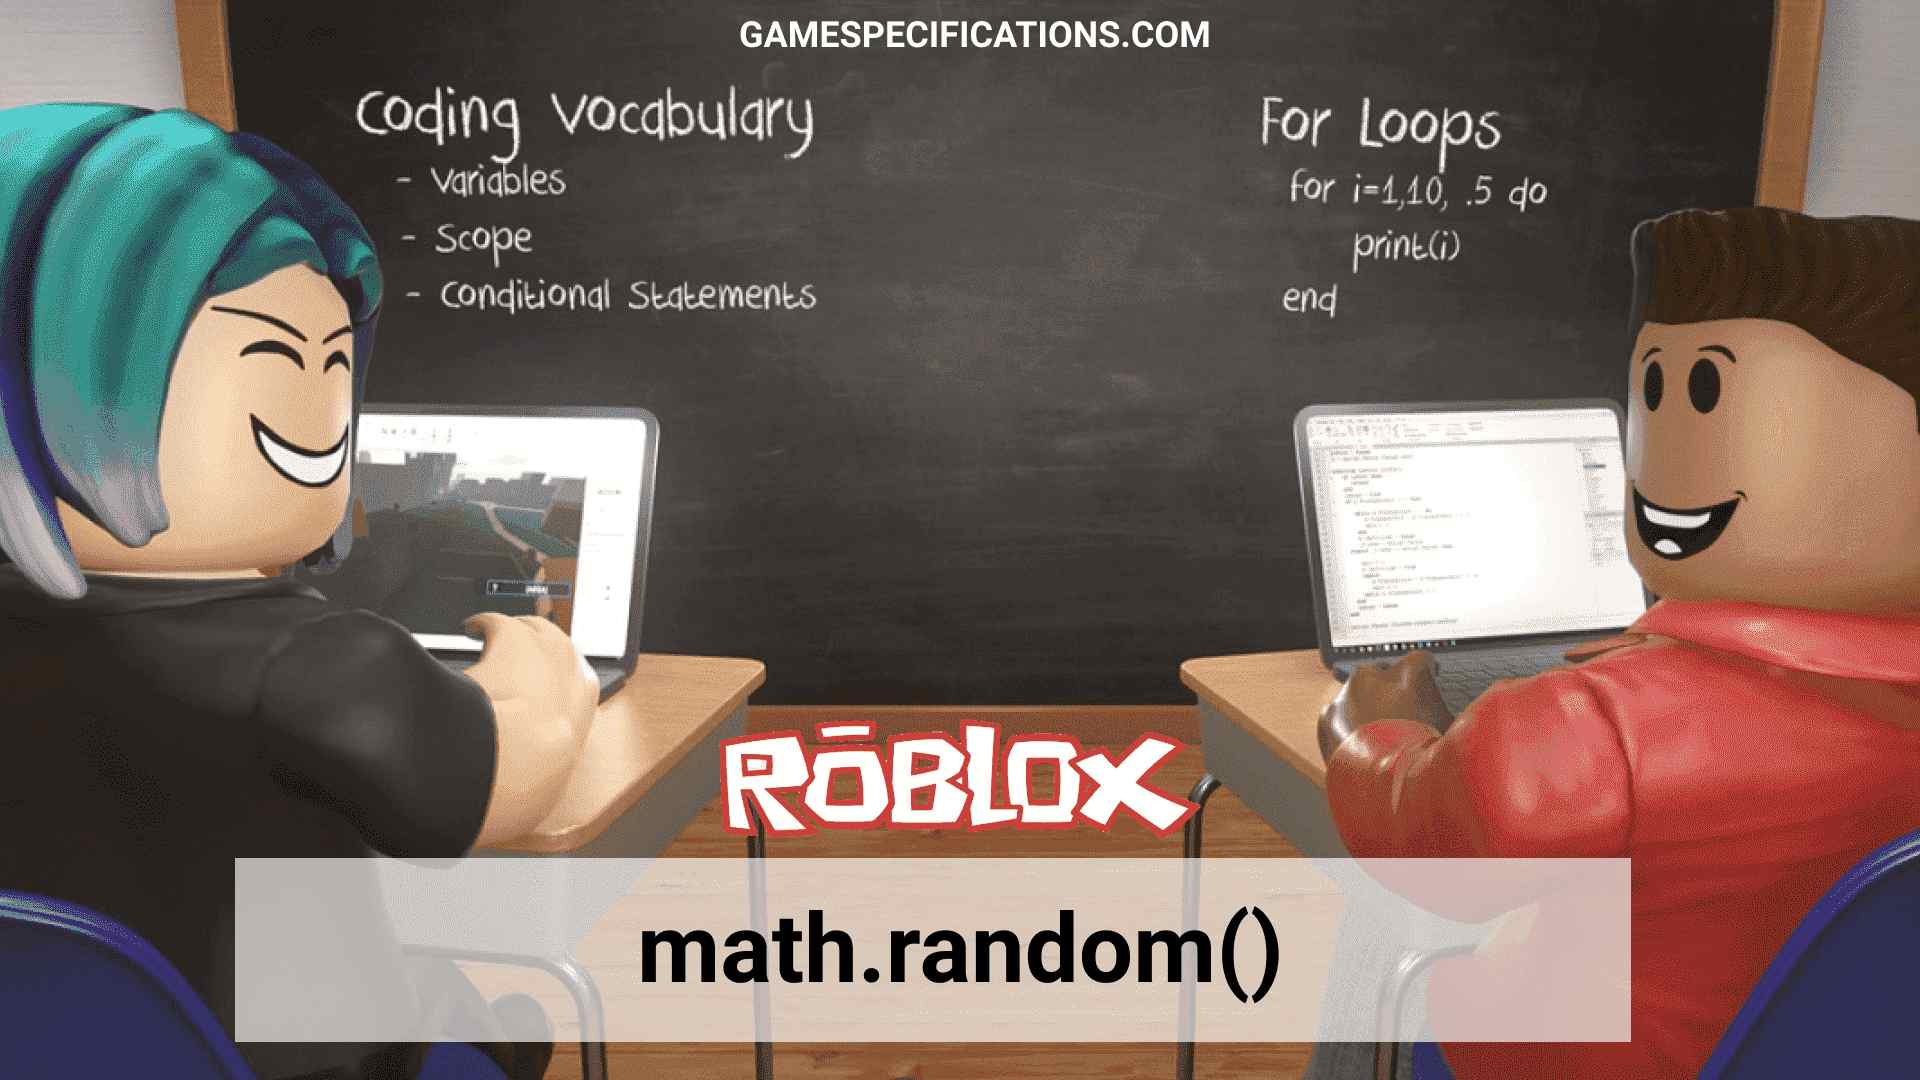 Roblox Math Random How To Use Math Random Efficiently In Roblox Game Specifications - how to fix character no spawning on roblox